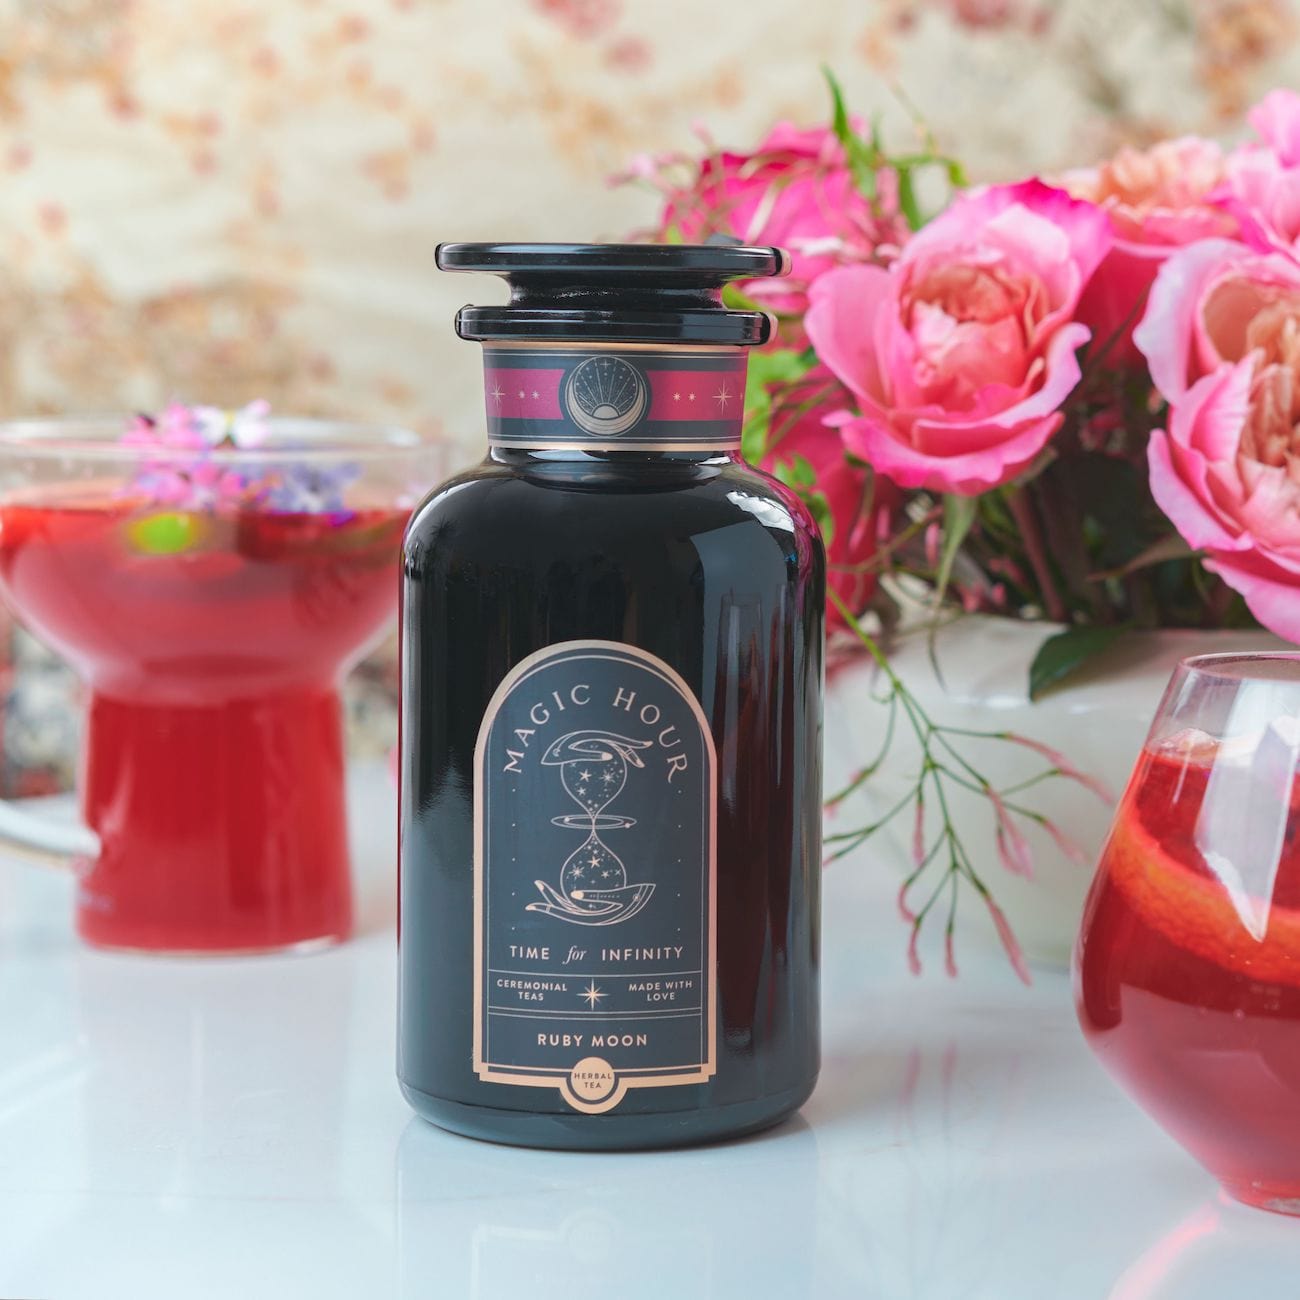 A dark glass bottle labeled &quot;Club Magic Hour: Ruby Moon™ : Hibiscus Elderberry Tea&quot; stands on a table. Next to it are two glasses containing red liquids with garnishes. In the background, a vase filled with vibrant, pink flowers adds a pop of color to the scene.